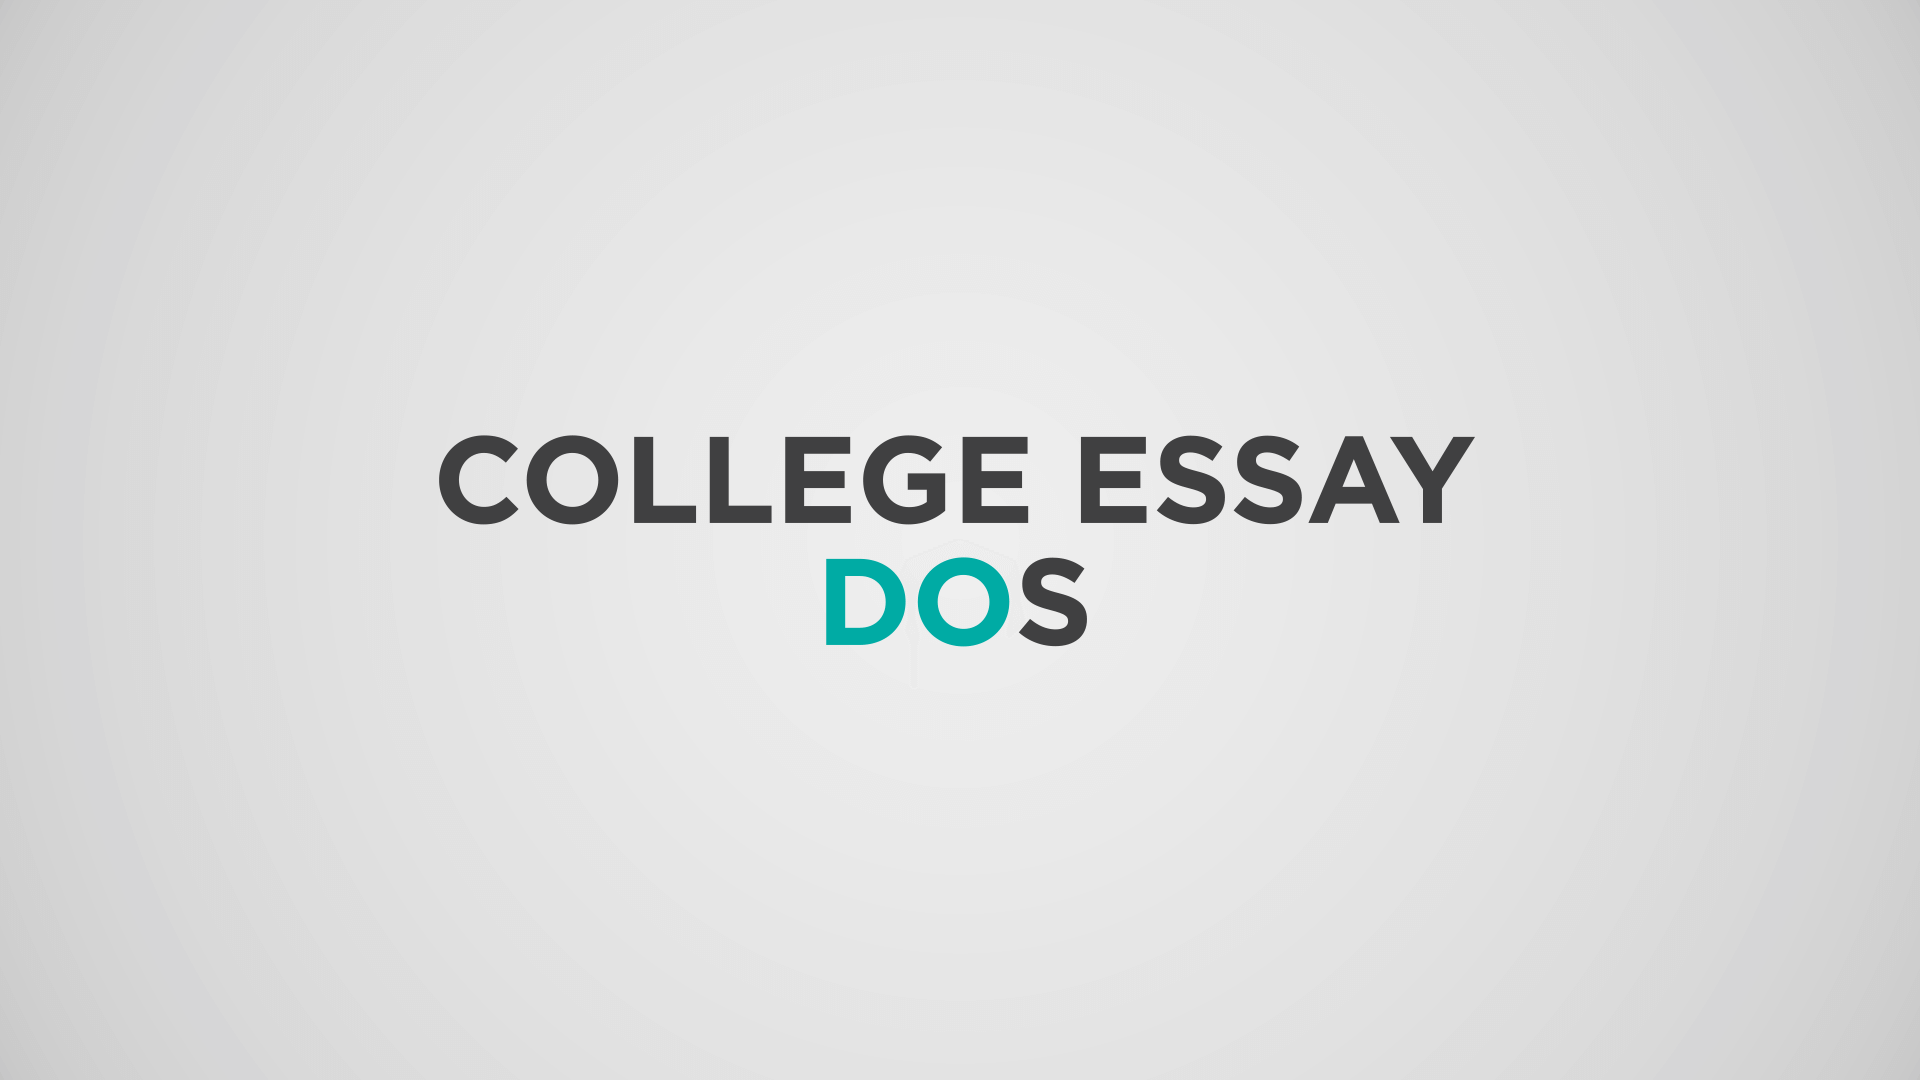 The 10 Things You Must Do to Write a College Essay Worthy of Admission